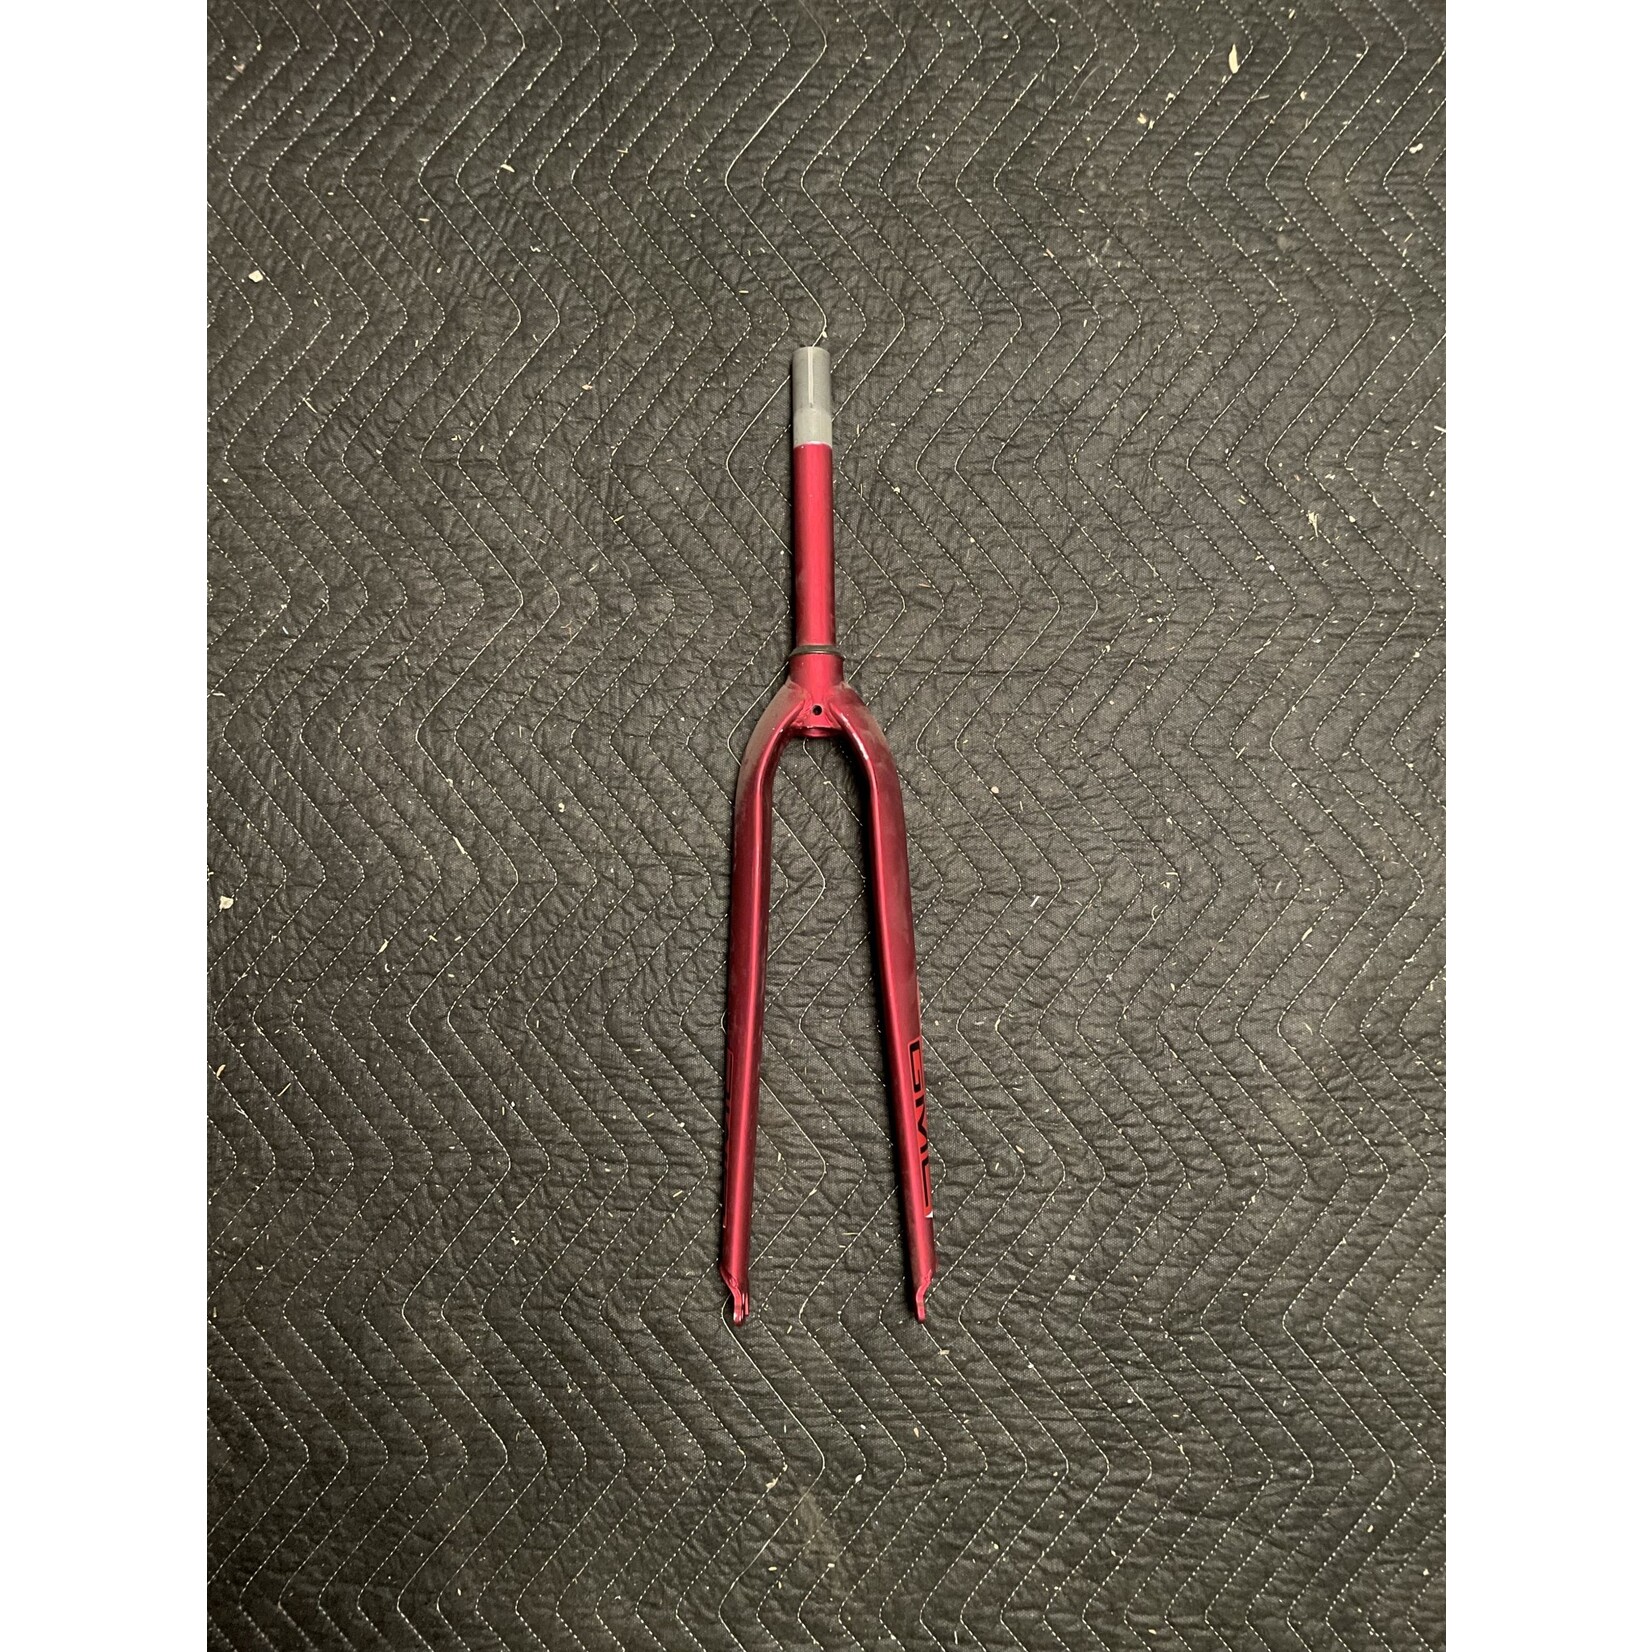 GMC 1” x 7 5/8” Threaded 700C Hybrid Bicycle Fork (Red)